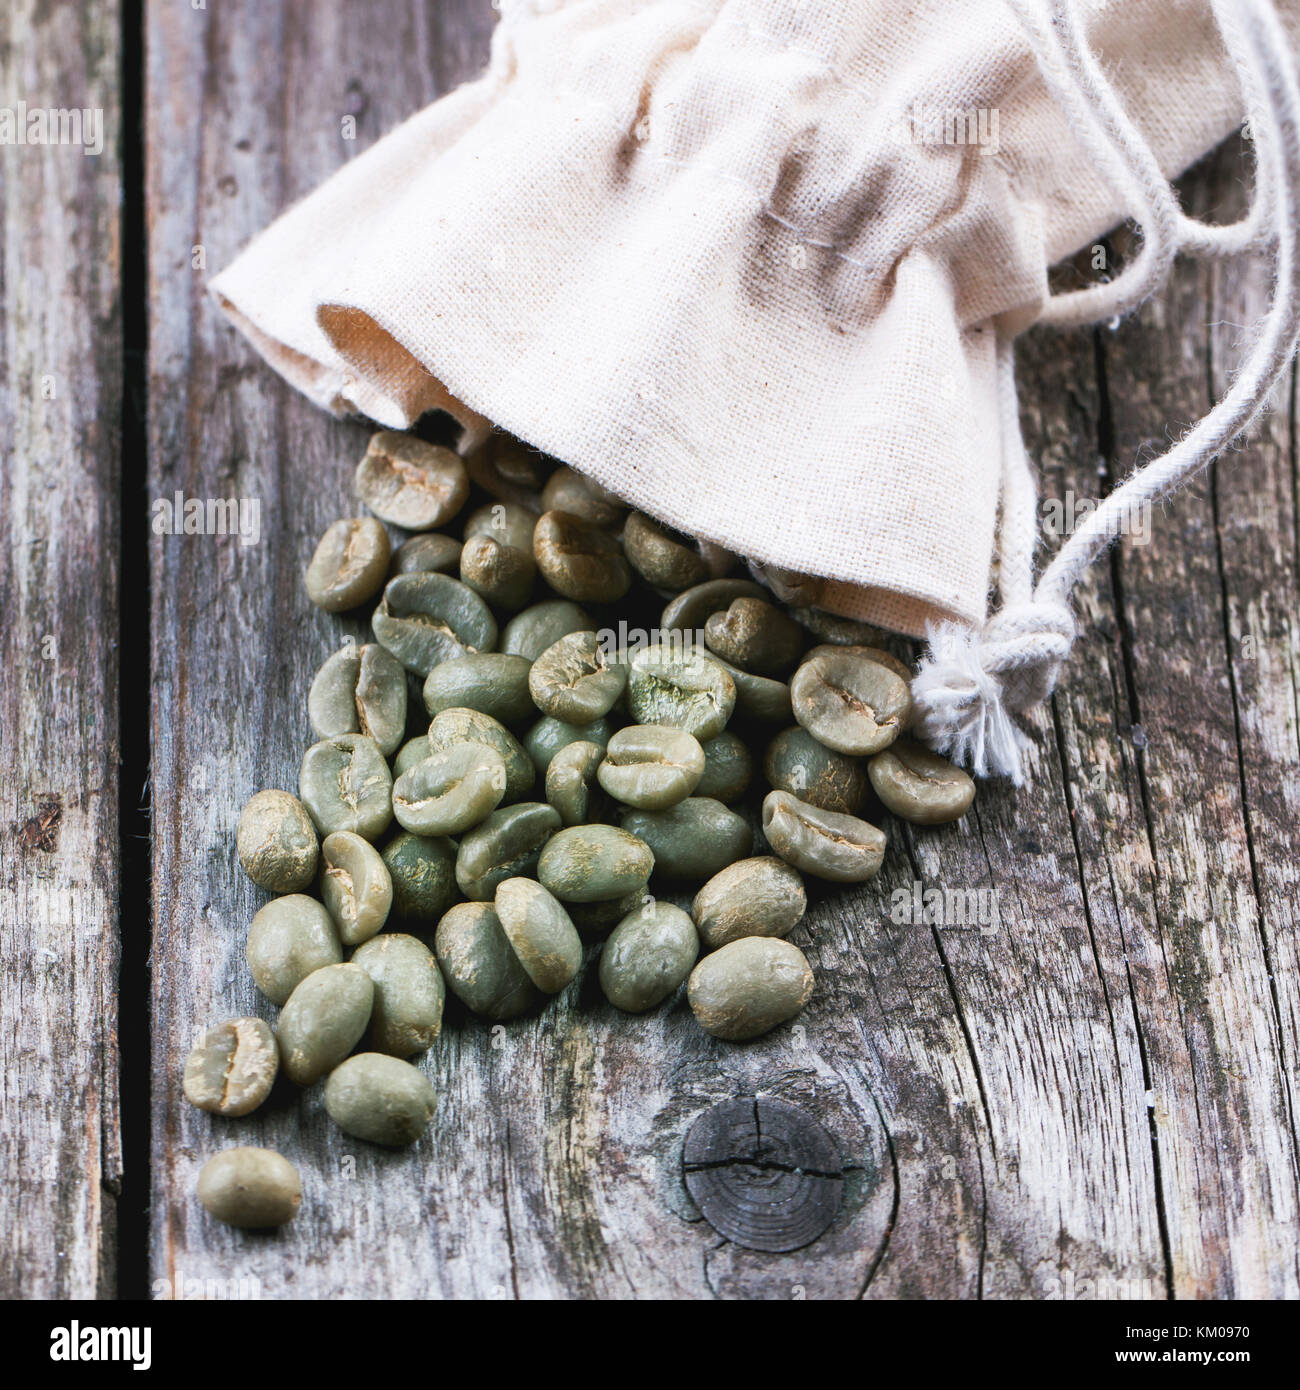 Sack with unroasted green coffee beans over wooden background. Square image with selective focus Stock Photo